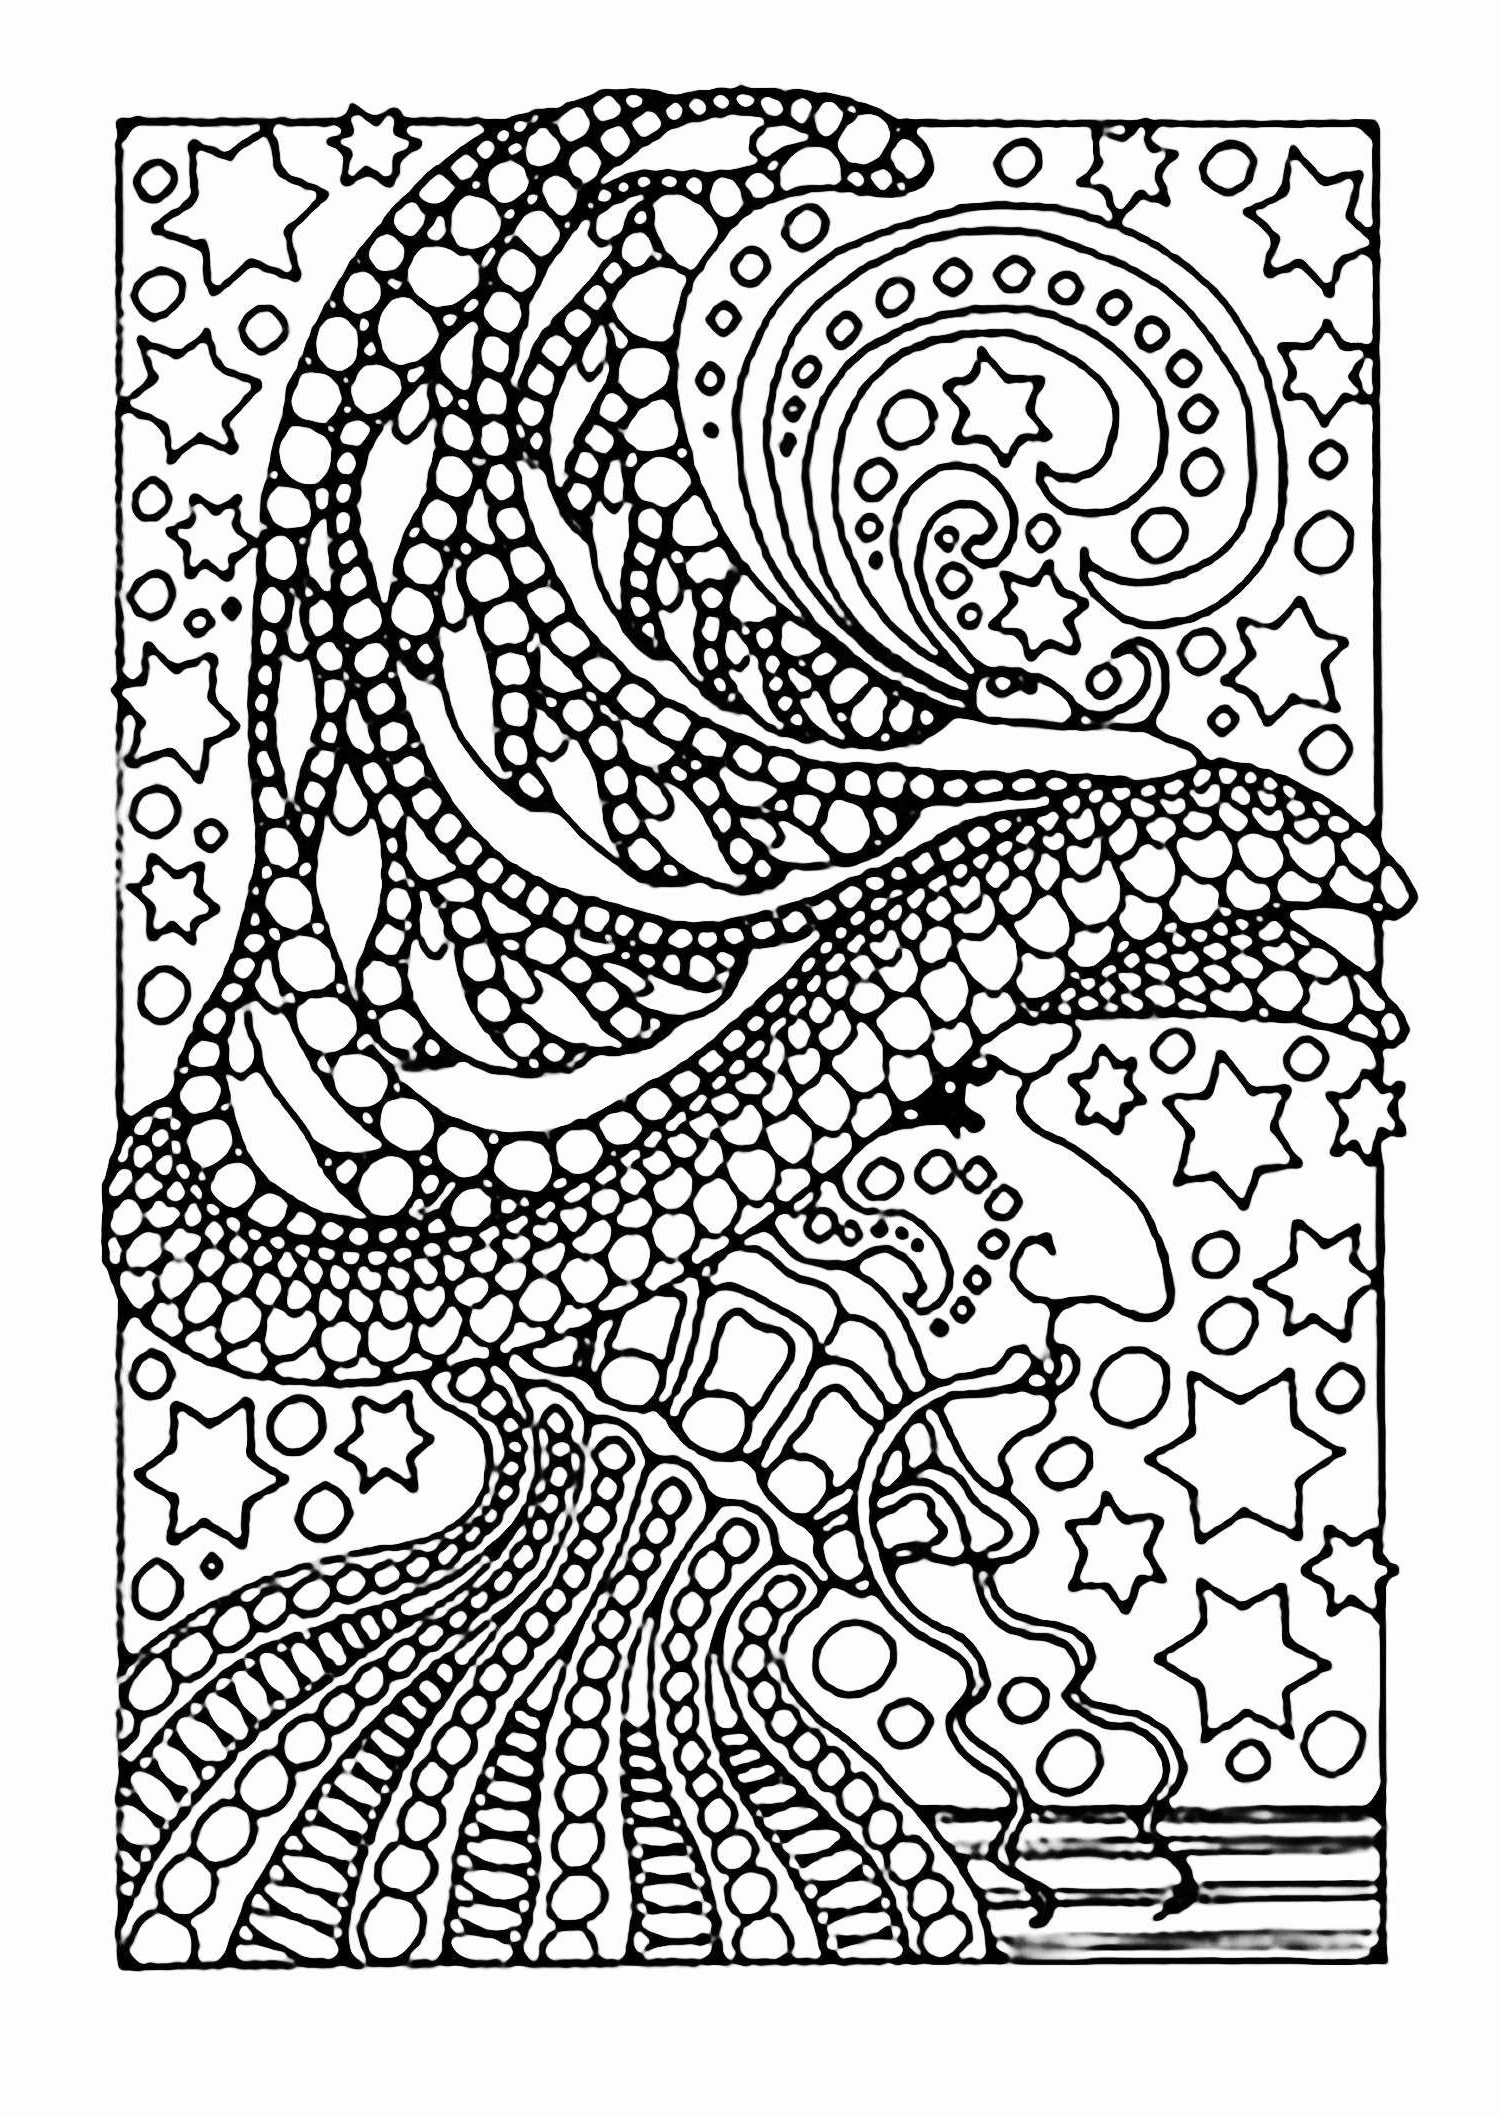 Halloween Kinderparty Schön 22 Inspirational S Chinchilla Coloring Page